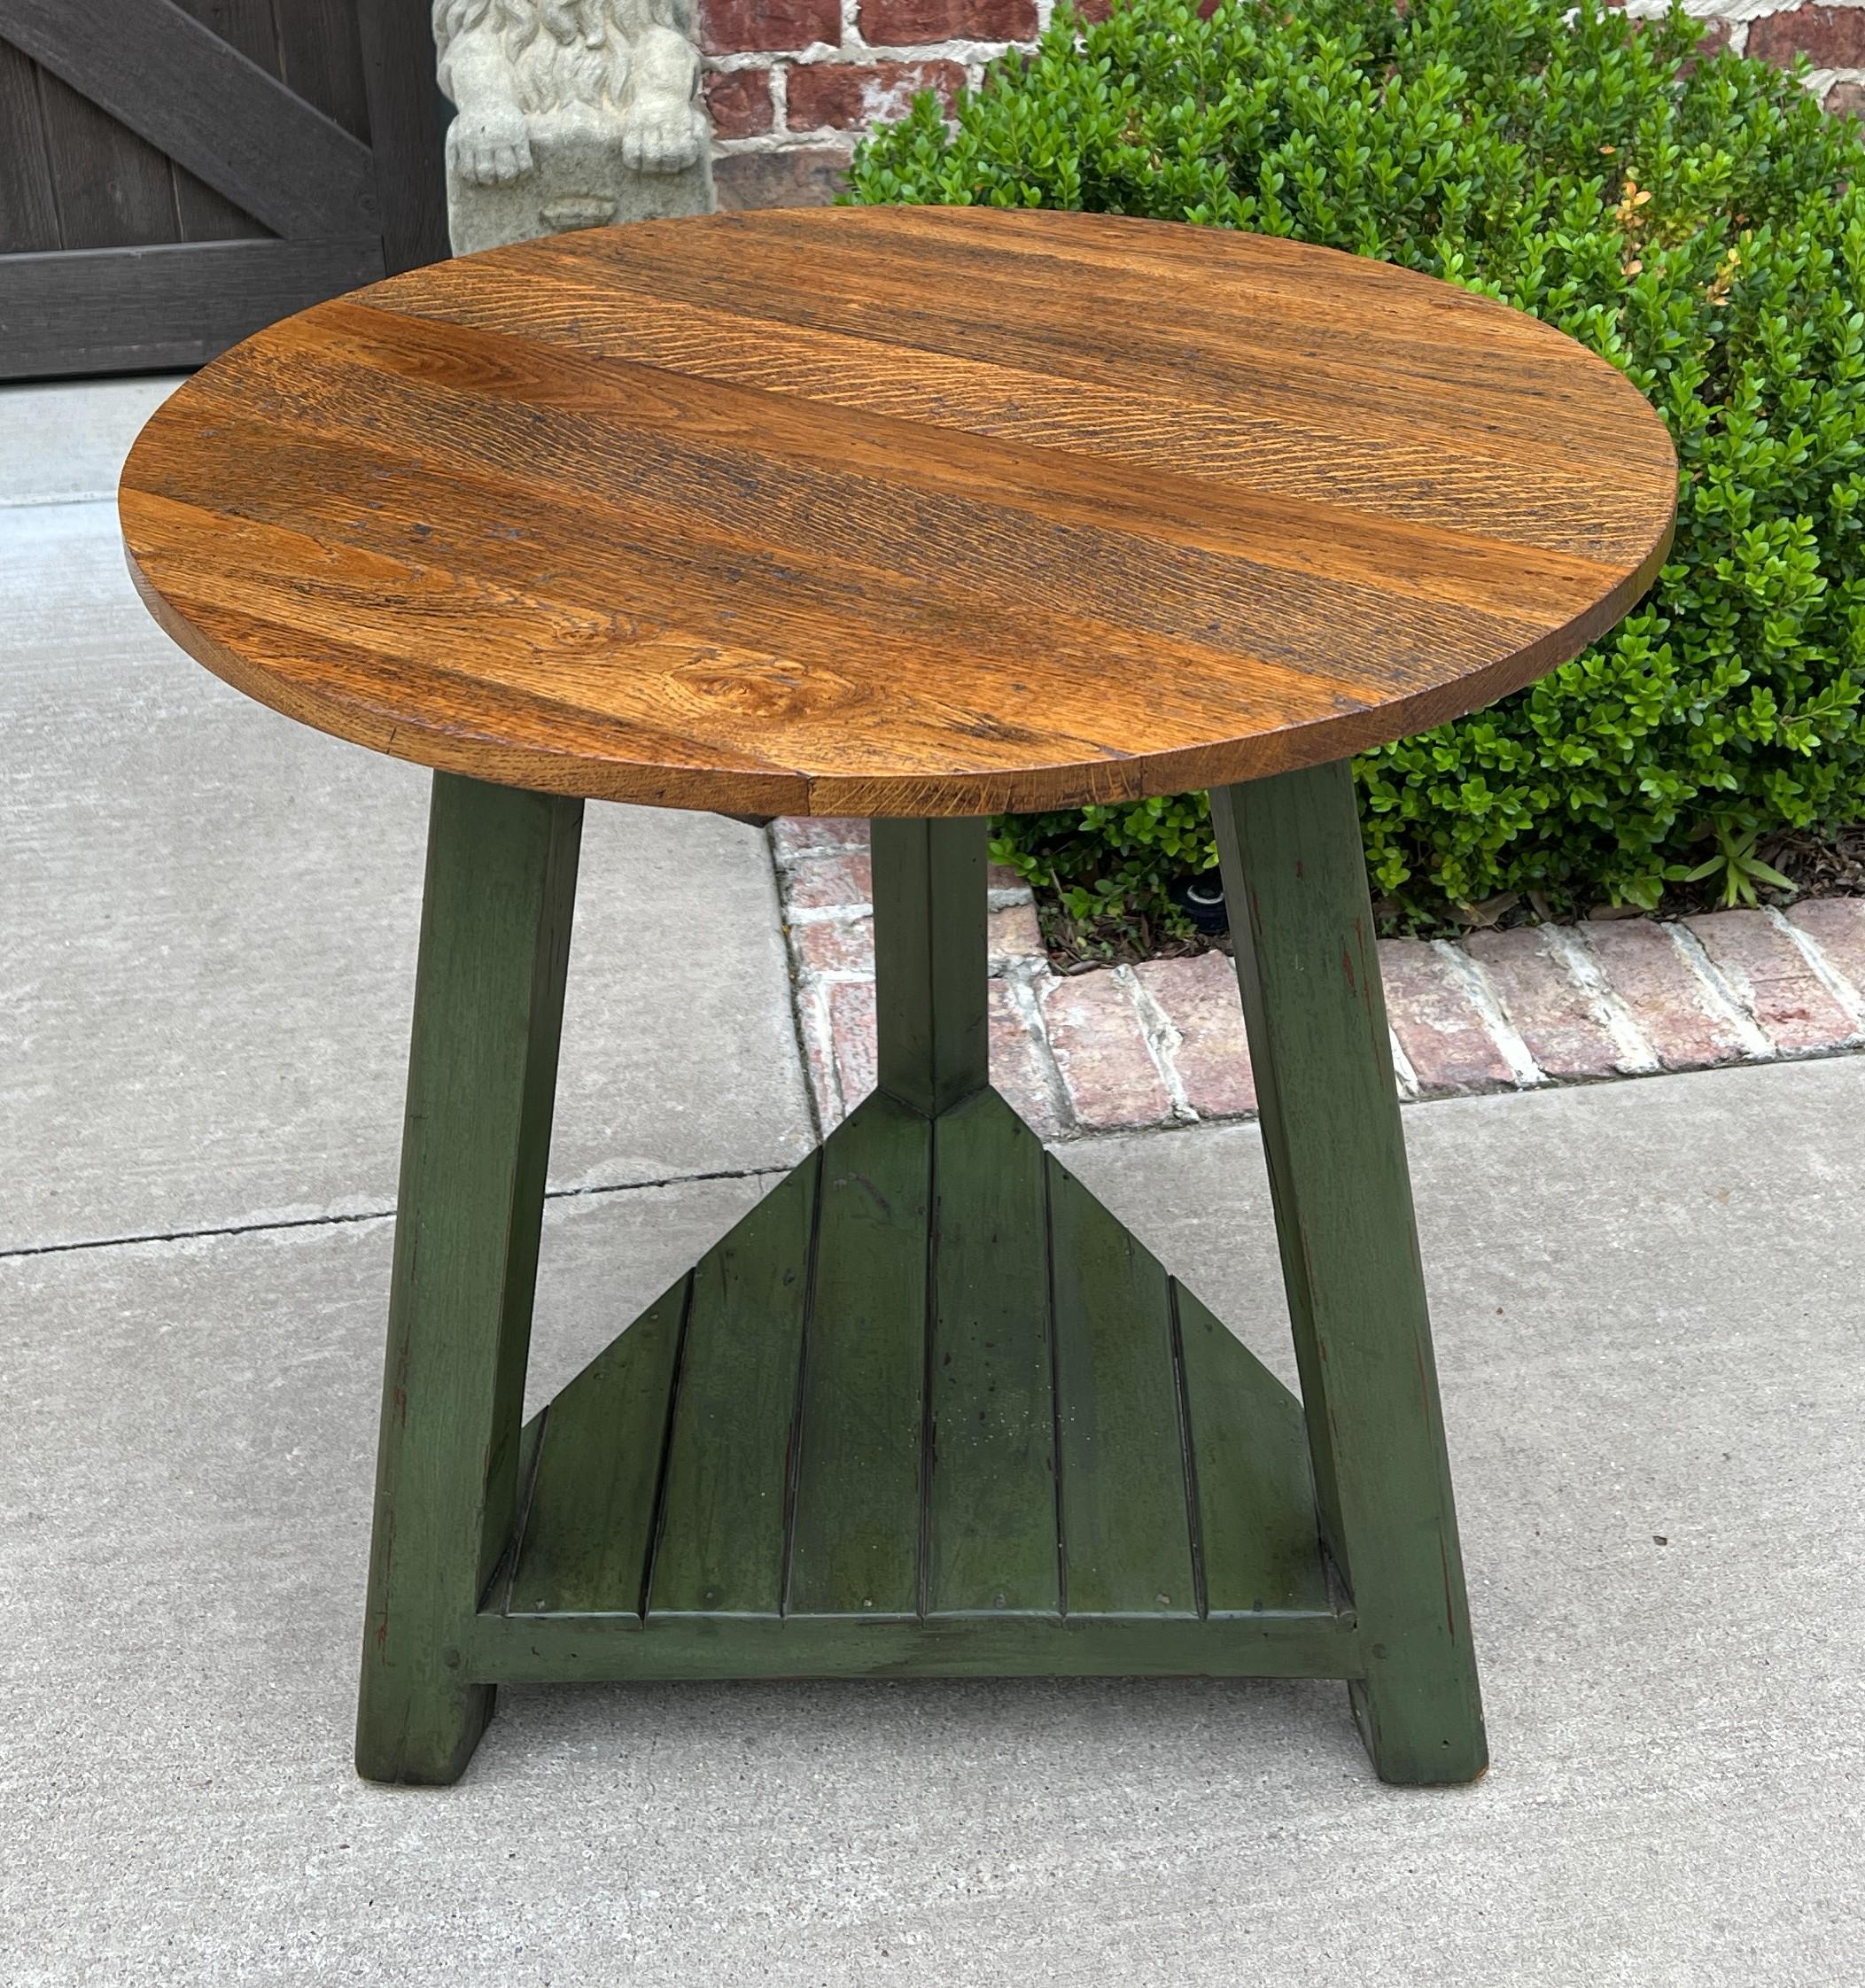 3 leg round side table